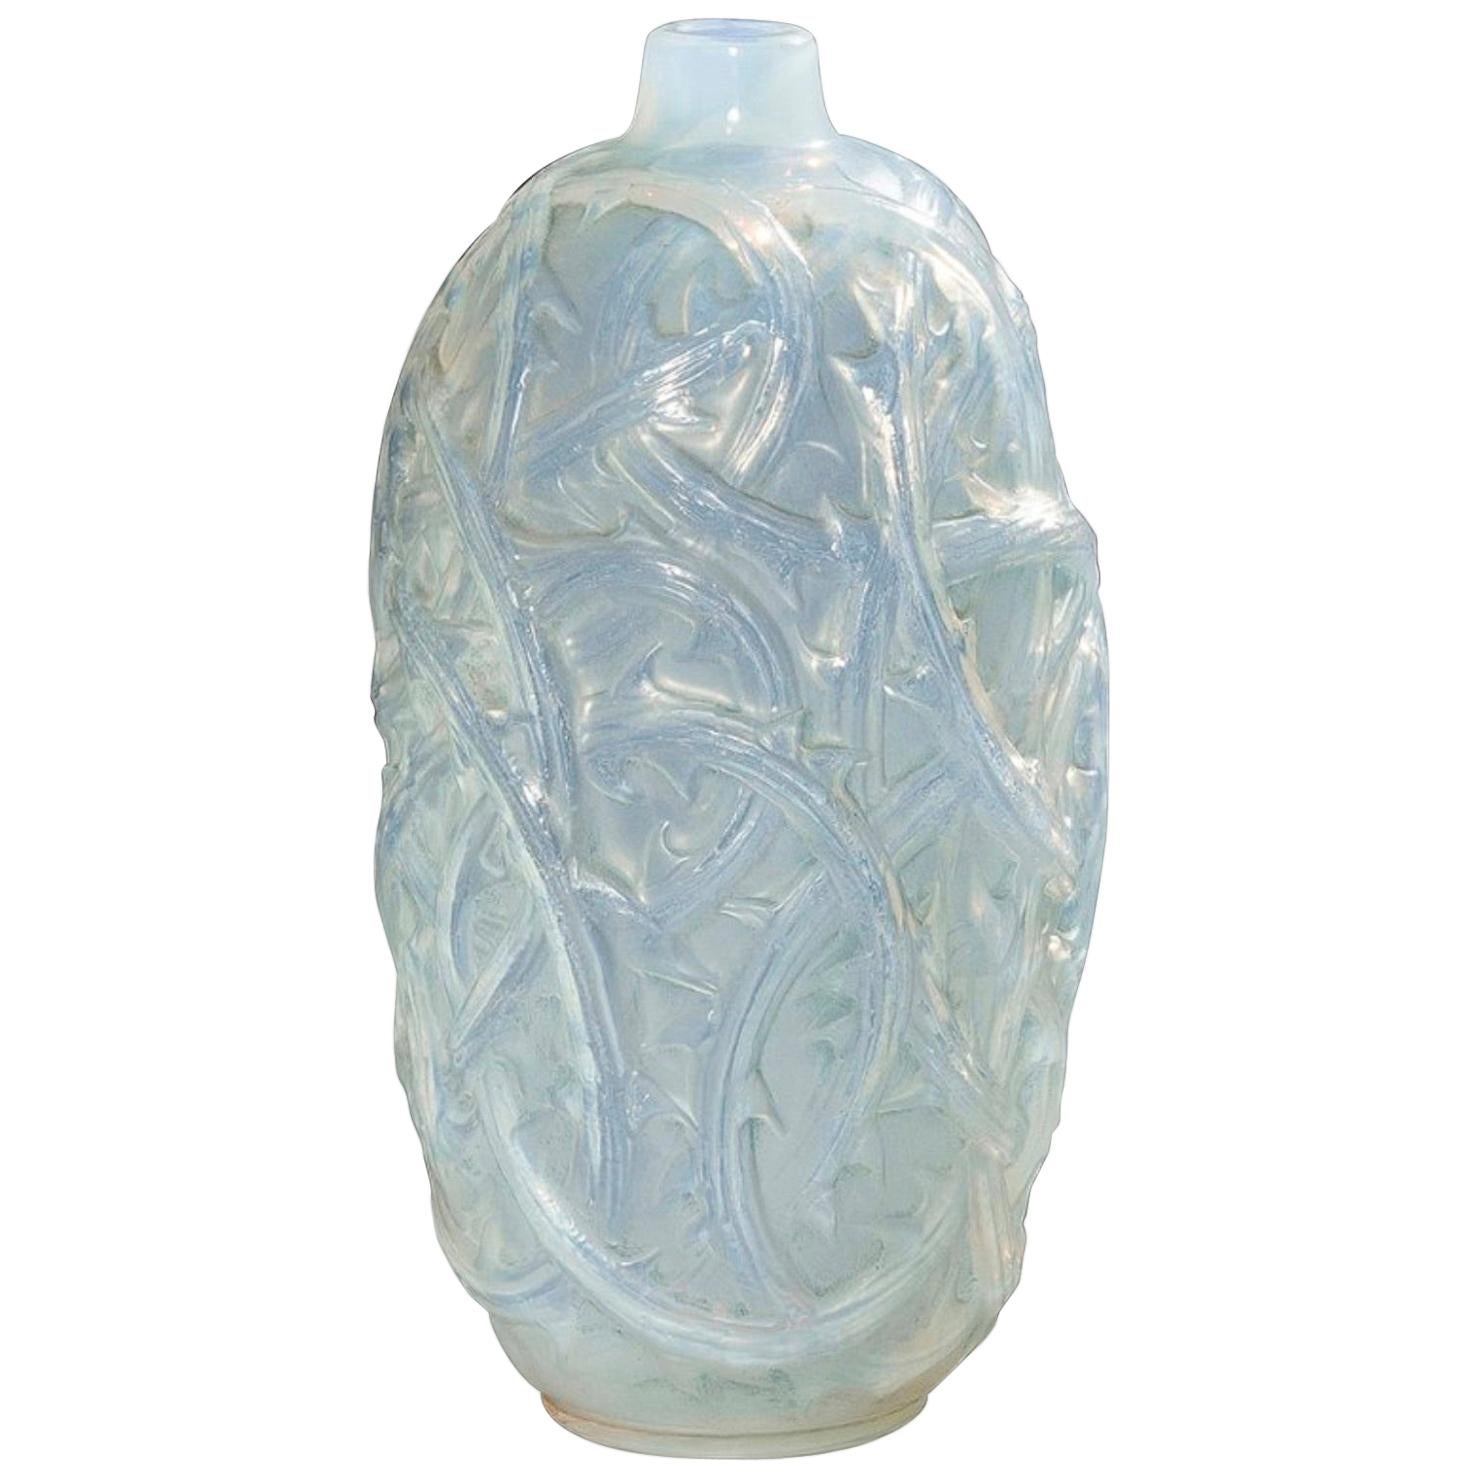 Lalique Vase Ronces: 24 cm tall.
cylindrical briars motif white opalescent and green patinated glass 
opalescent decorated narrow soliflor glass R. Lalique vase.
Rene Lalique ronces vase no. 946.
Félix MARCILHAC, 